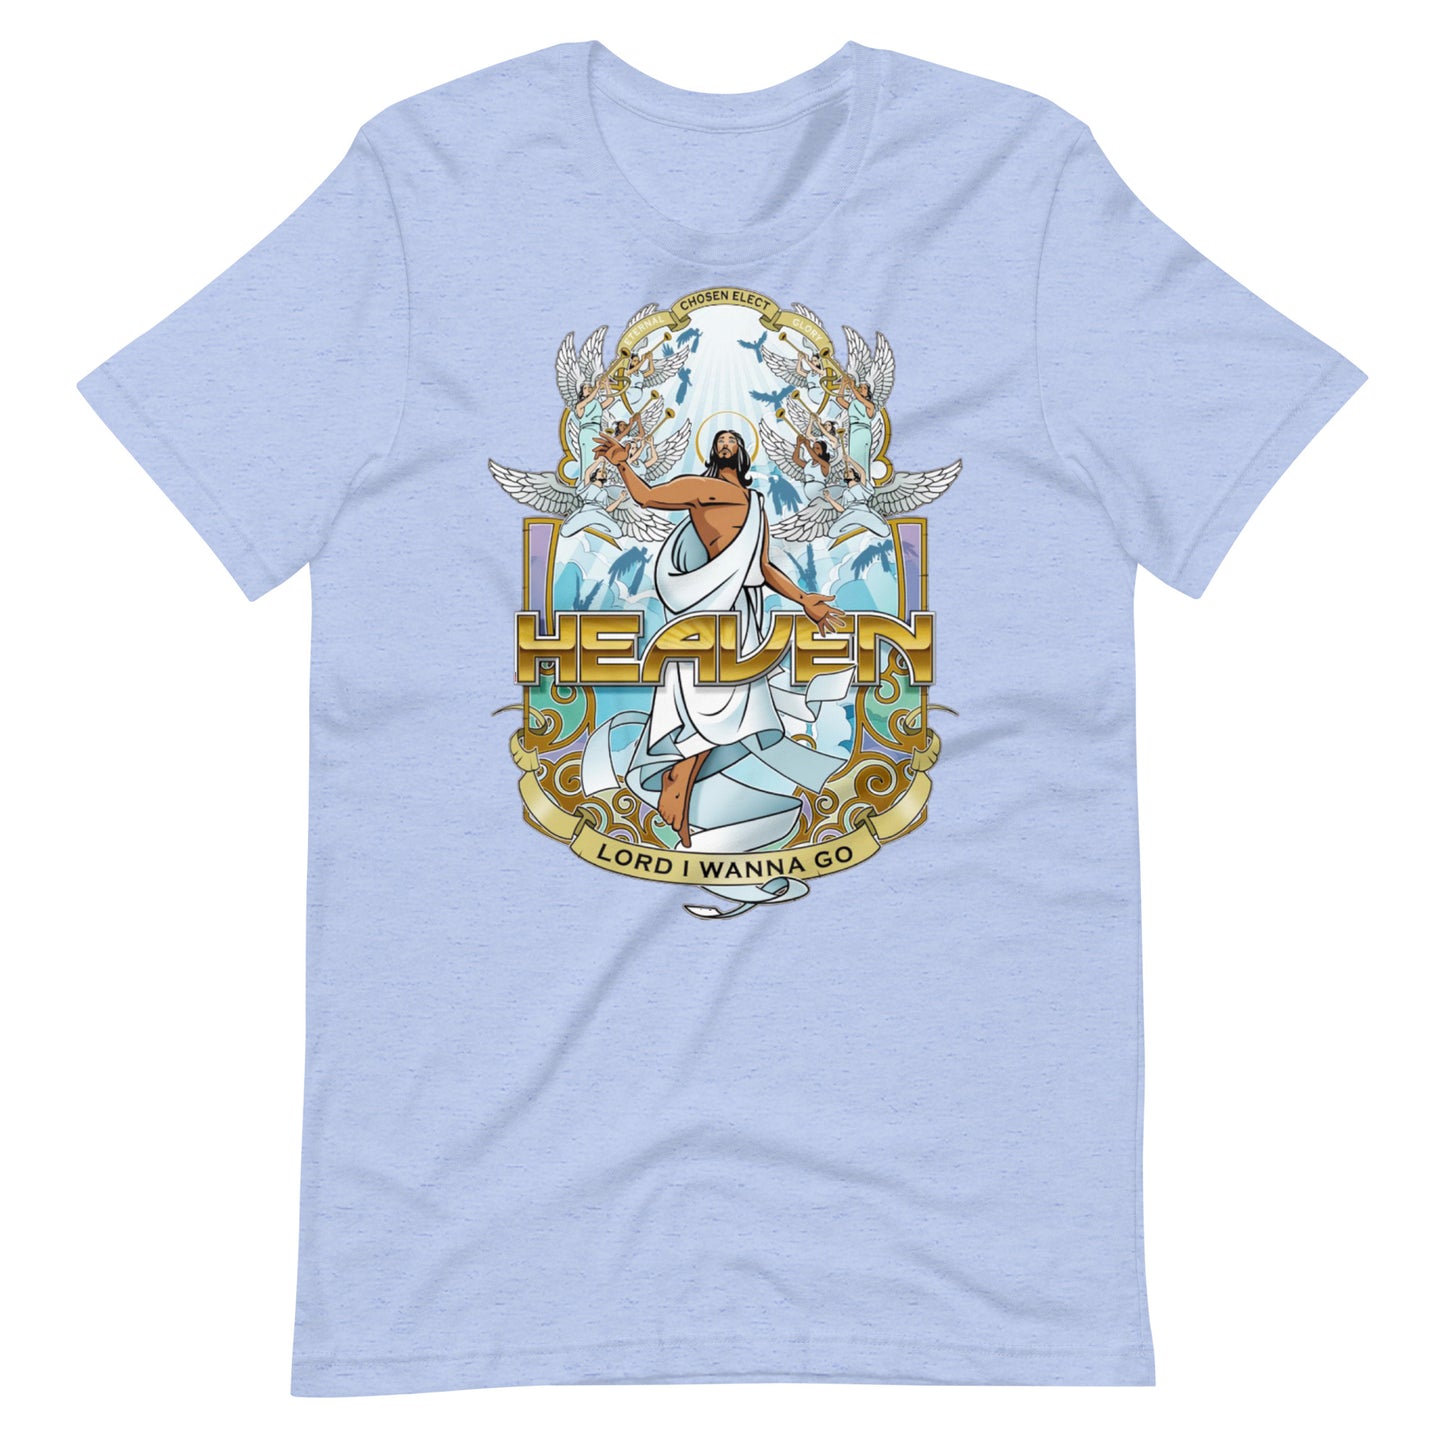 CE Heaven inspired graphic t-shirt